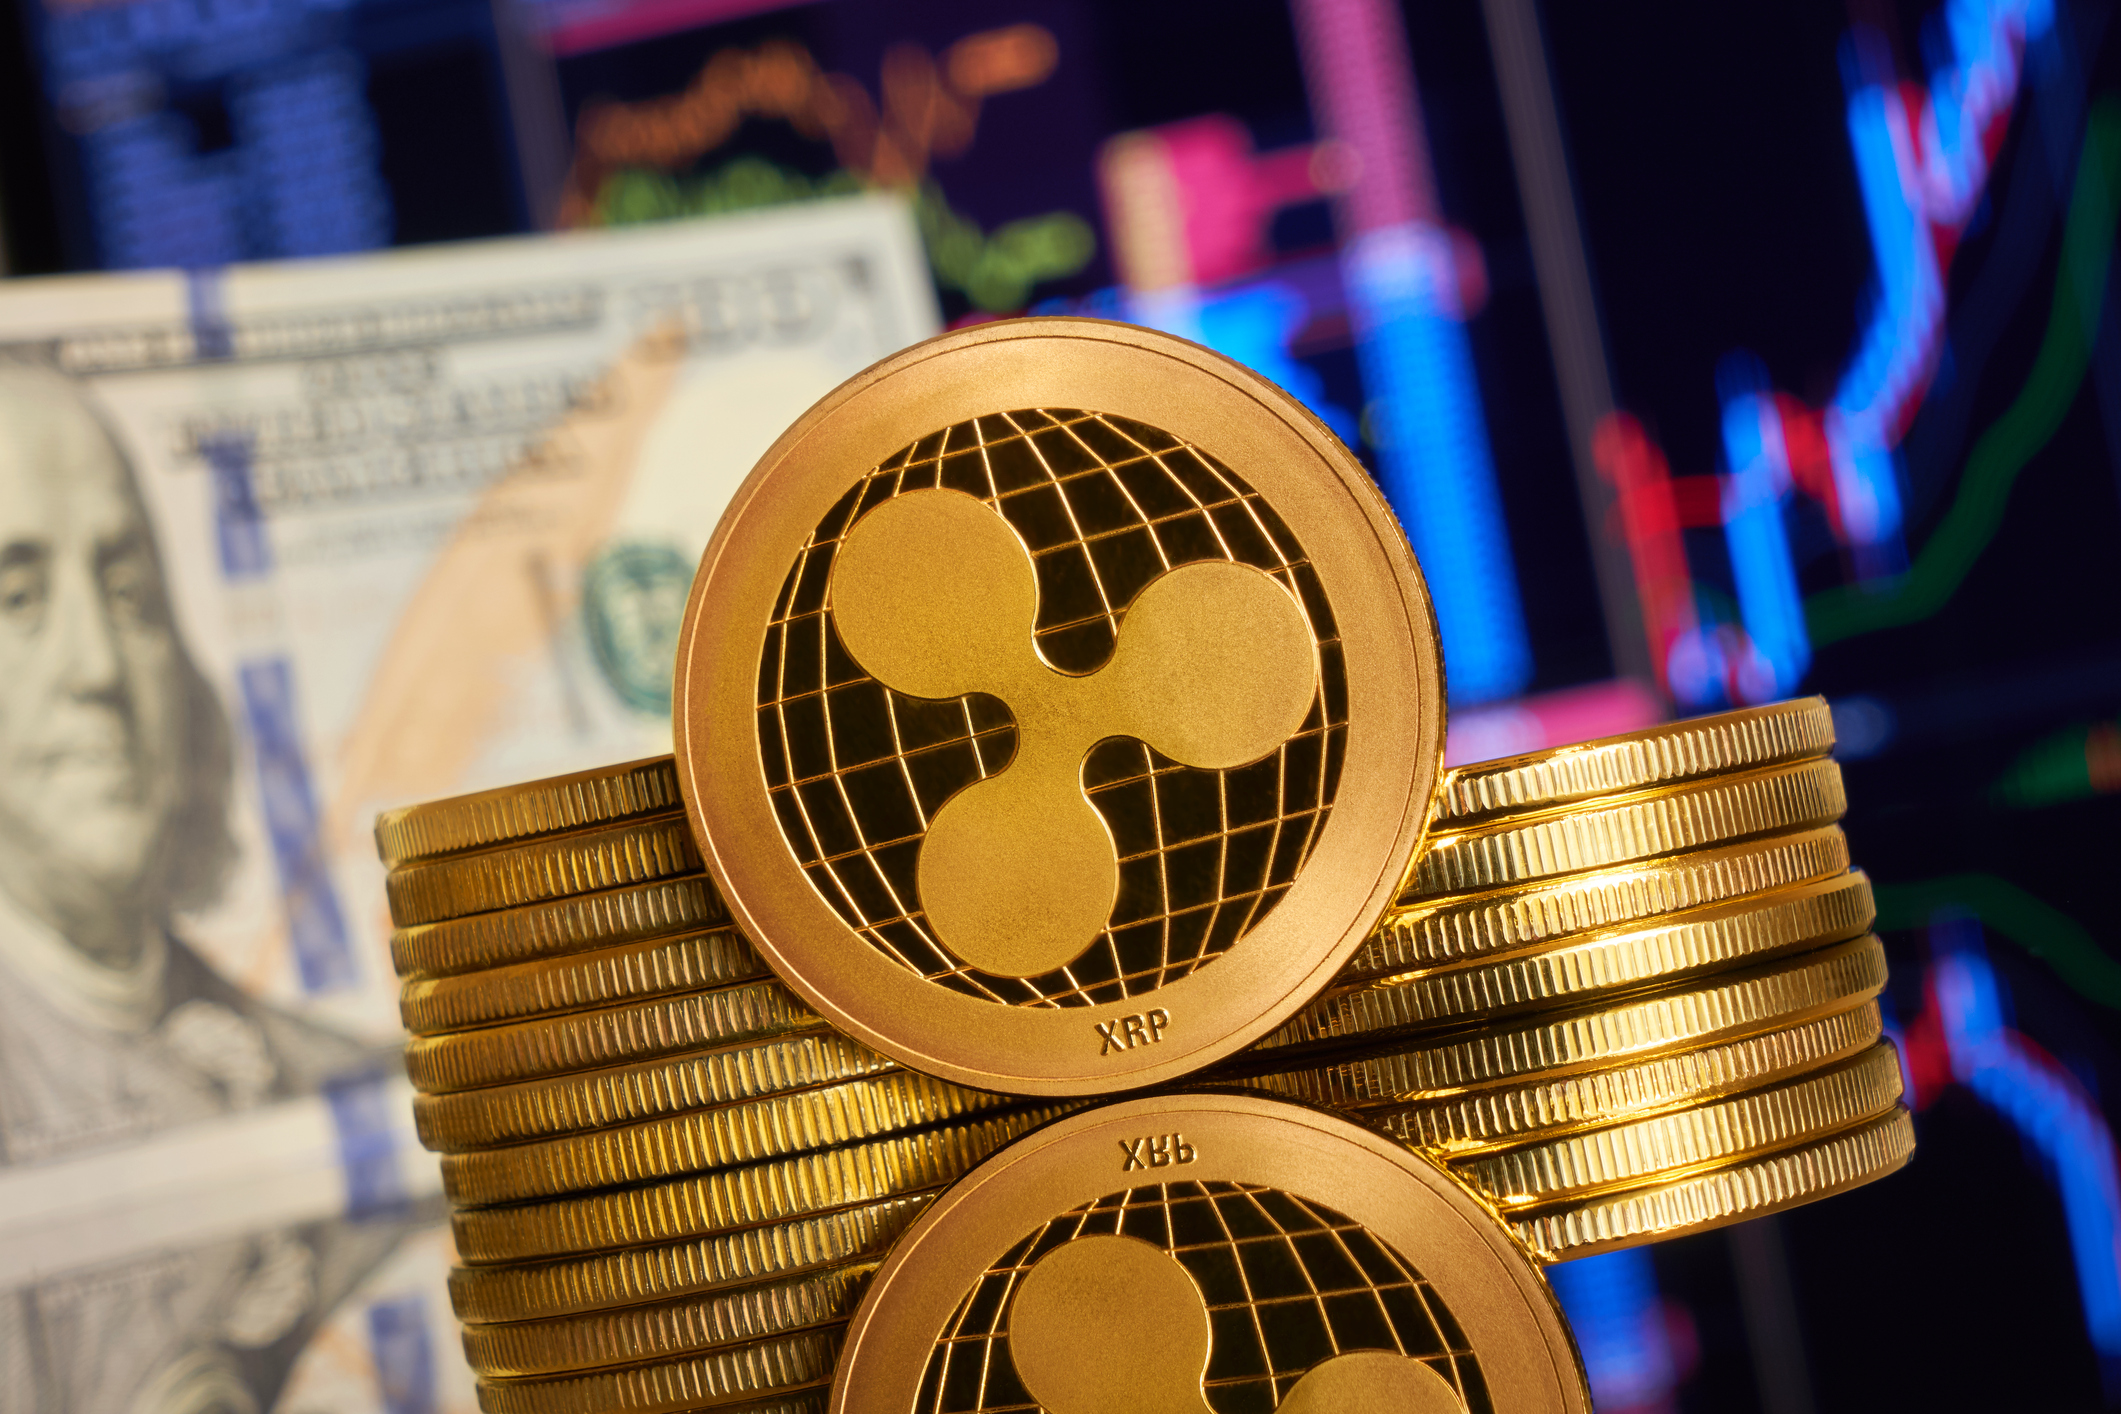 XRP News: Ripple IPO At Risk Of Being Delayed, Expert Warns